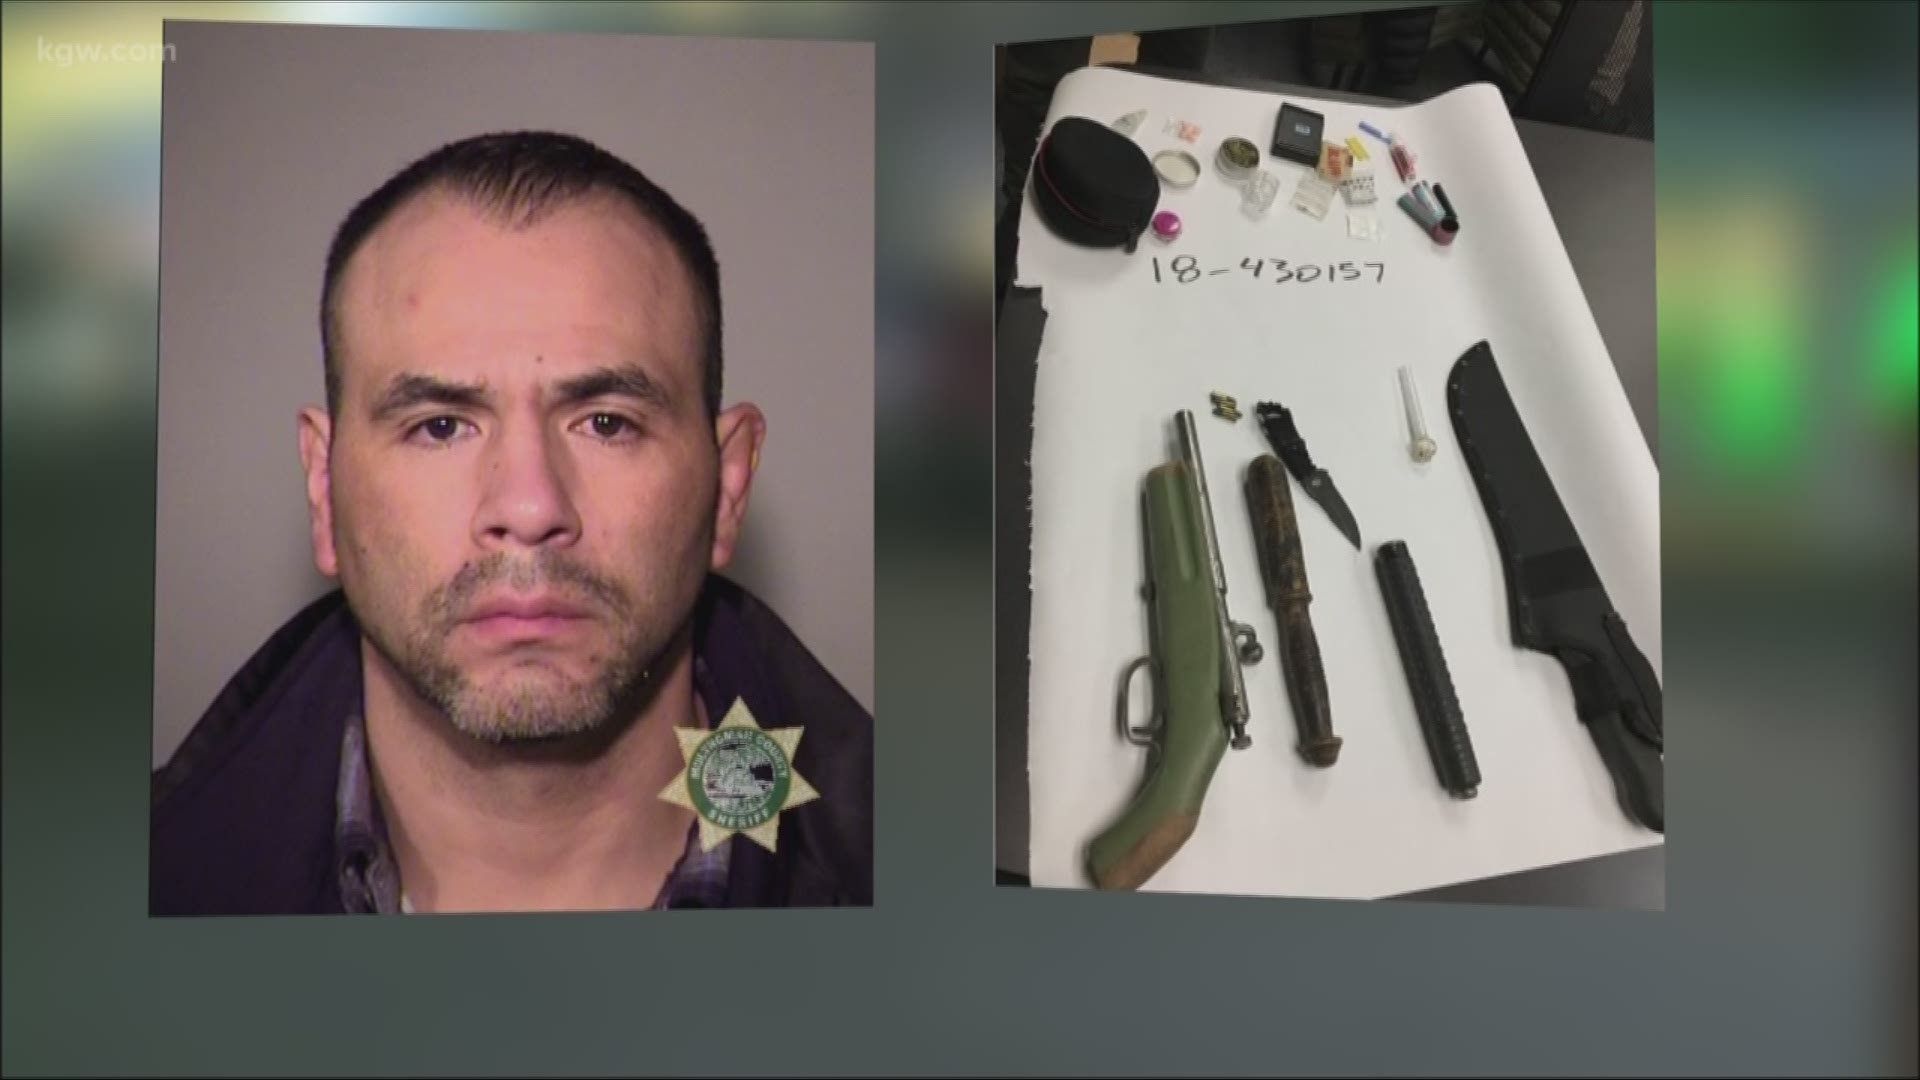 Two men, including a Portland firefighter, were arrested after police said drugs and guns were found in their car when they were pulled over in Southeast Portland on Thursday.